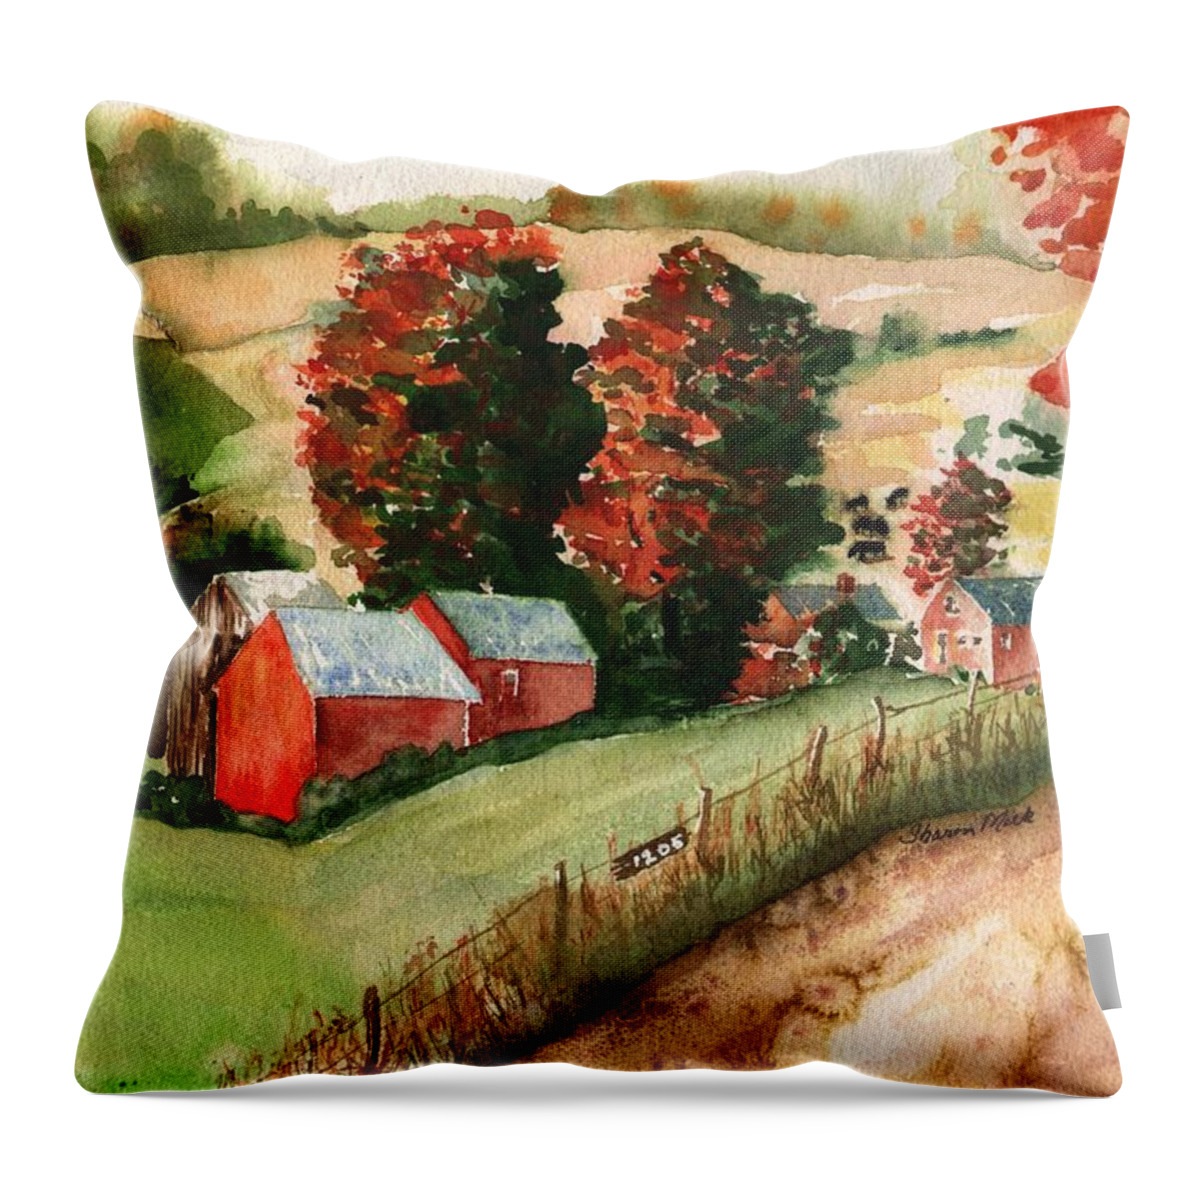 Jenne Farm Throw Pillow featuring the painting Jenne Farm by Sharon Mick